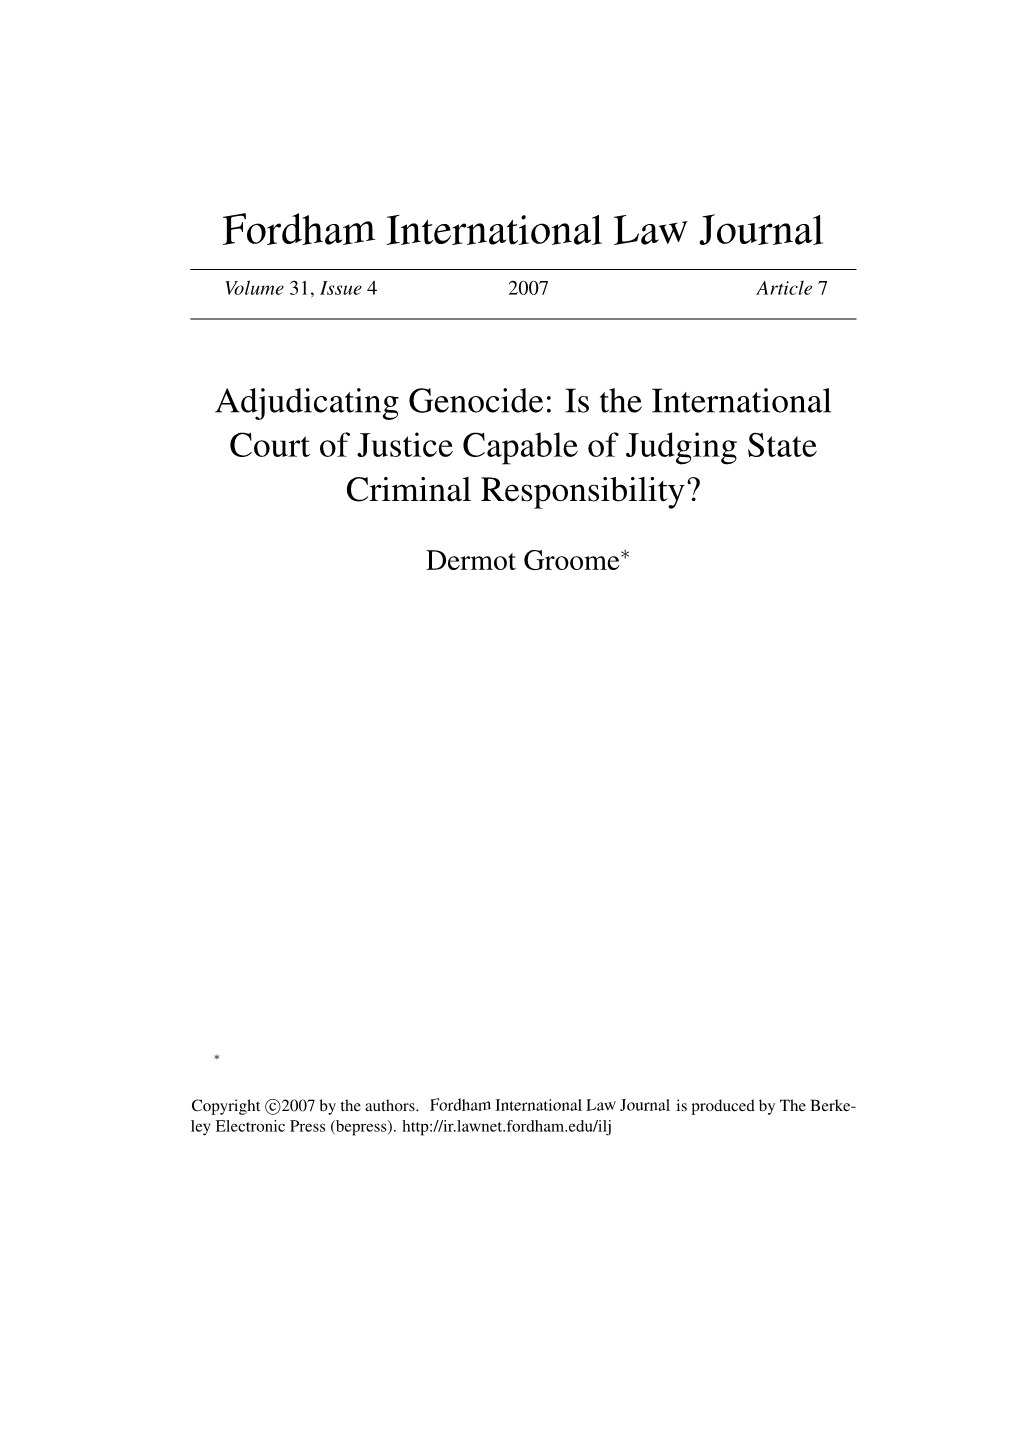 Adjudicating Genocide: Is the International Court of Justice Capable of Judging State Criminal Responsibility?